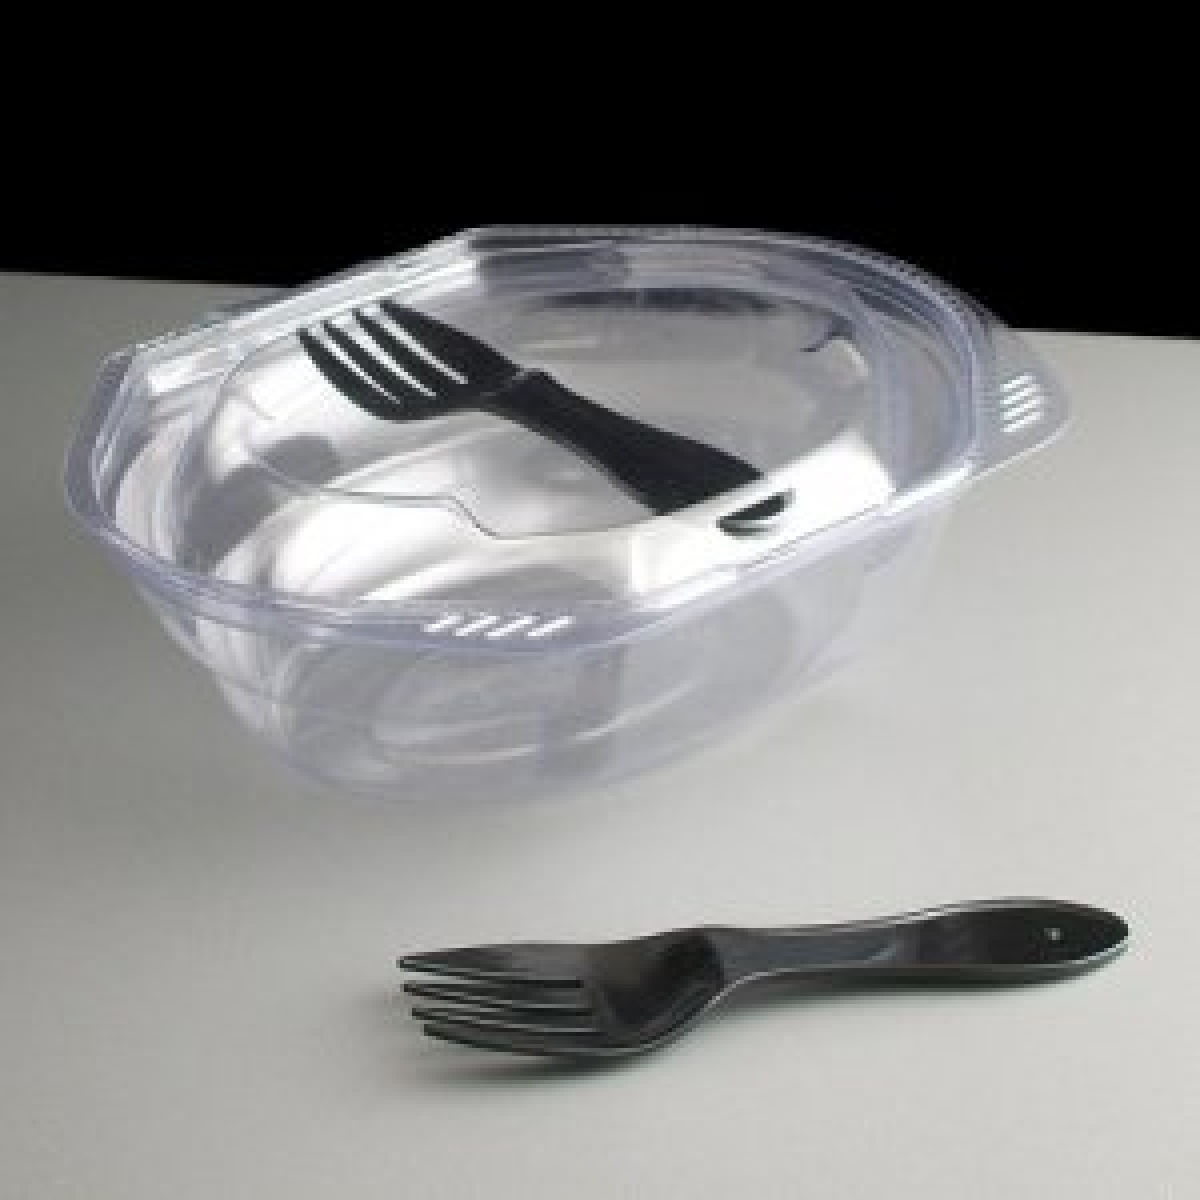 oval hinged container with spork 190*140*60